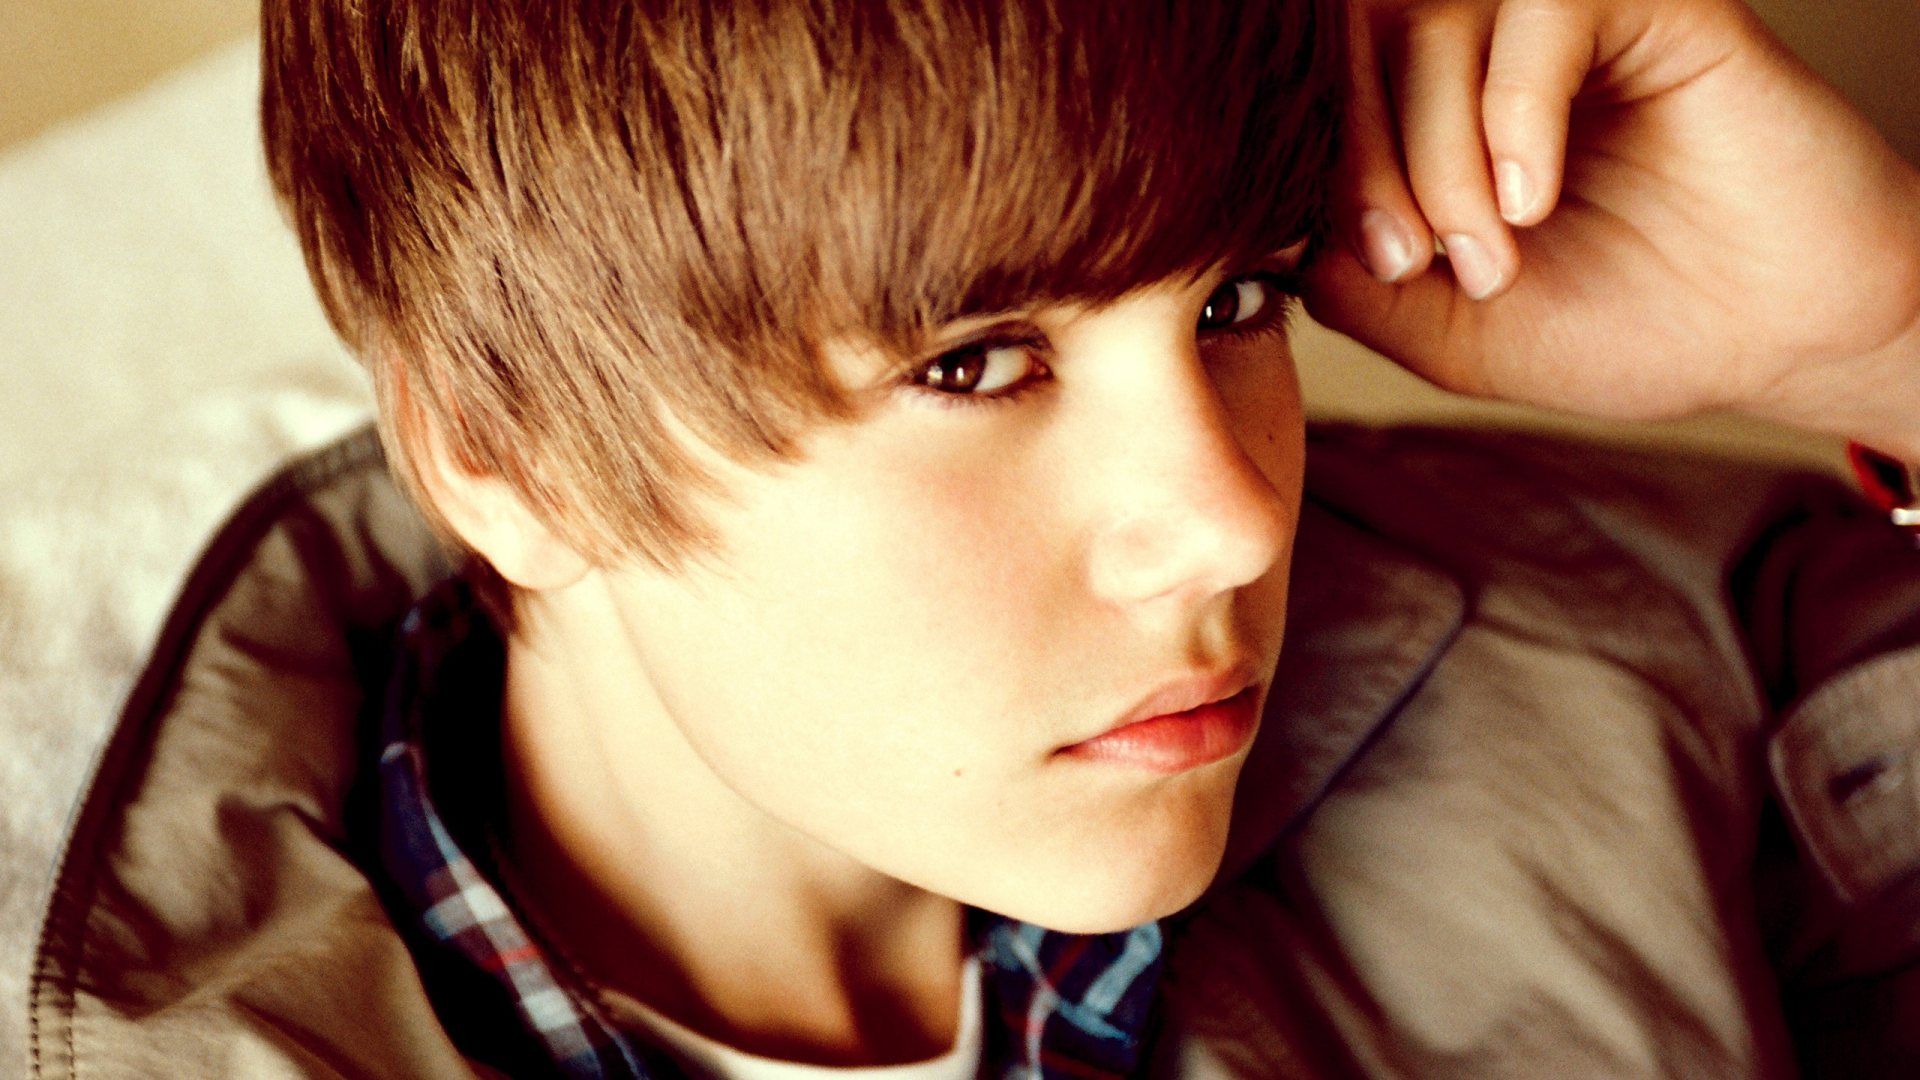 Justin Bieber Baby Photo - HD Wallpapers Pretty